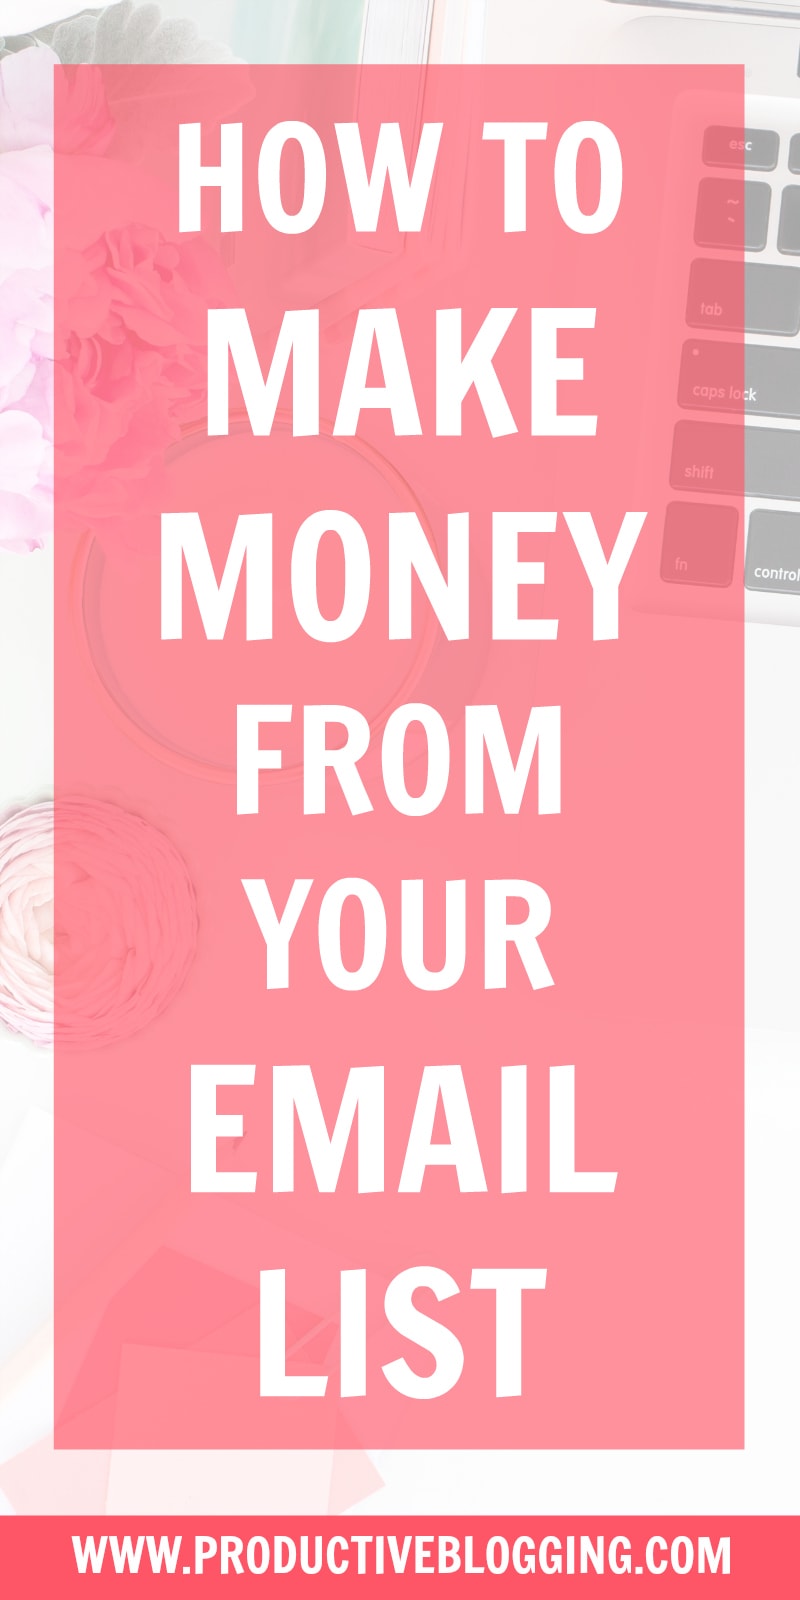 Your email list is one of your most valuable assets as a blogger (there’s a reason they say ‘the money is in the list’) But how exactly do you go about turning your list into cash? Here’s how to make money from your email list… #makemoneyblogging #makemoneywithemailmarketing #makemoneywithemail #emailmarketing #emailmarketingtips #blogging #bloggers #blogtips #bloggingtips #emaillist #emaillistgrowth #emaillistbuilding #emailsubscribers #productivitytips #productiveblogging#blogsmarternotharder